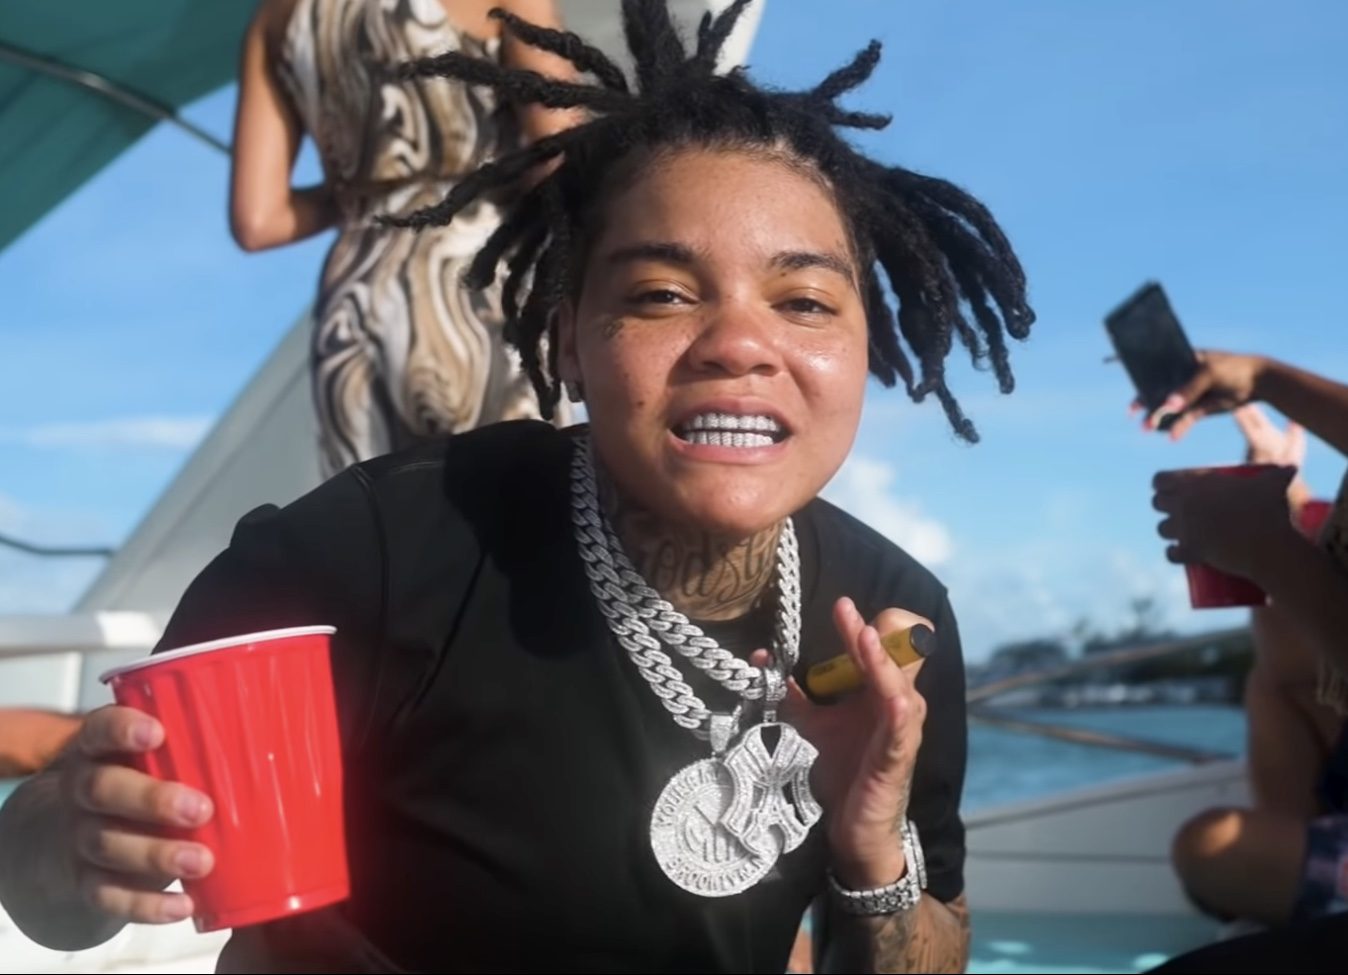 Young M.A Releases Visual for New Song 'Henny’d Up' *NSFW*